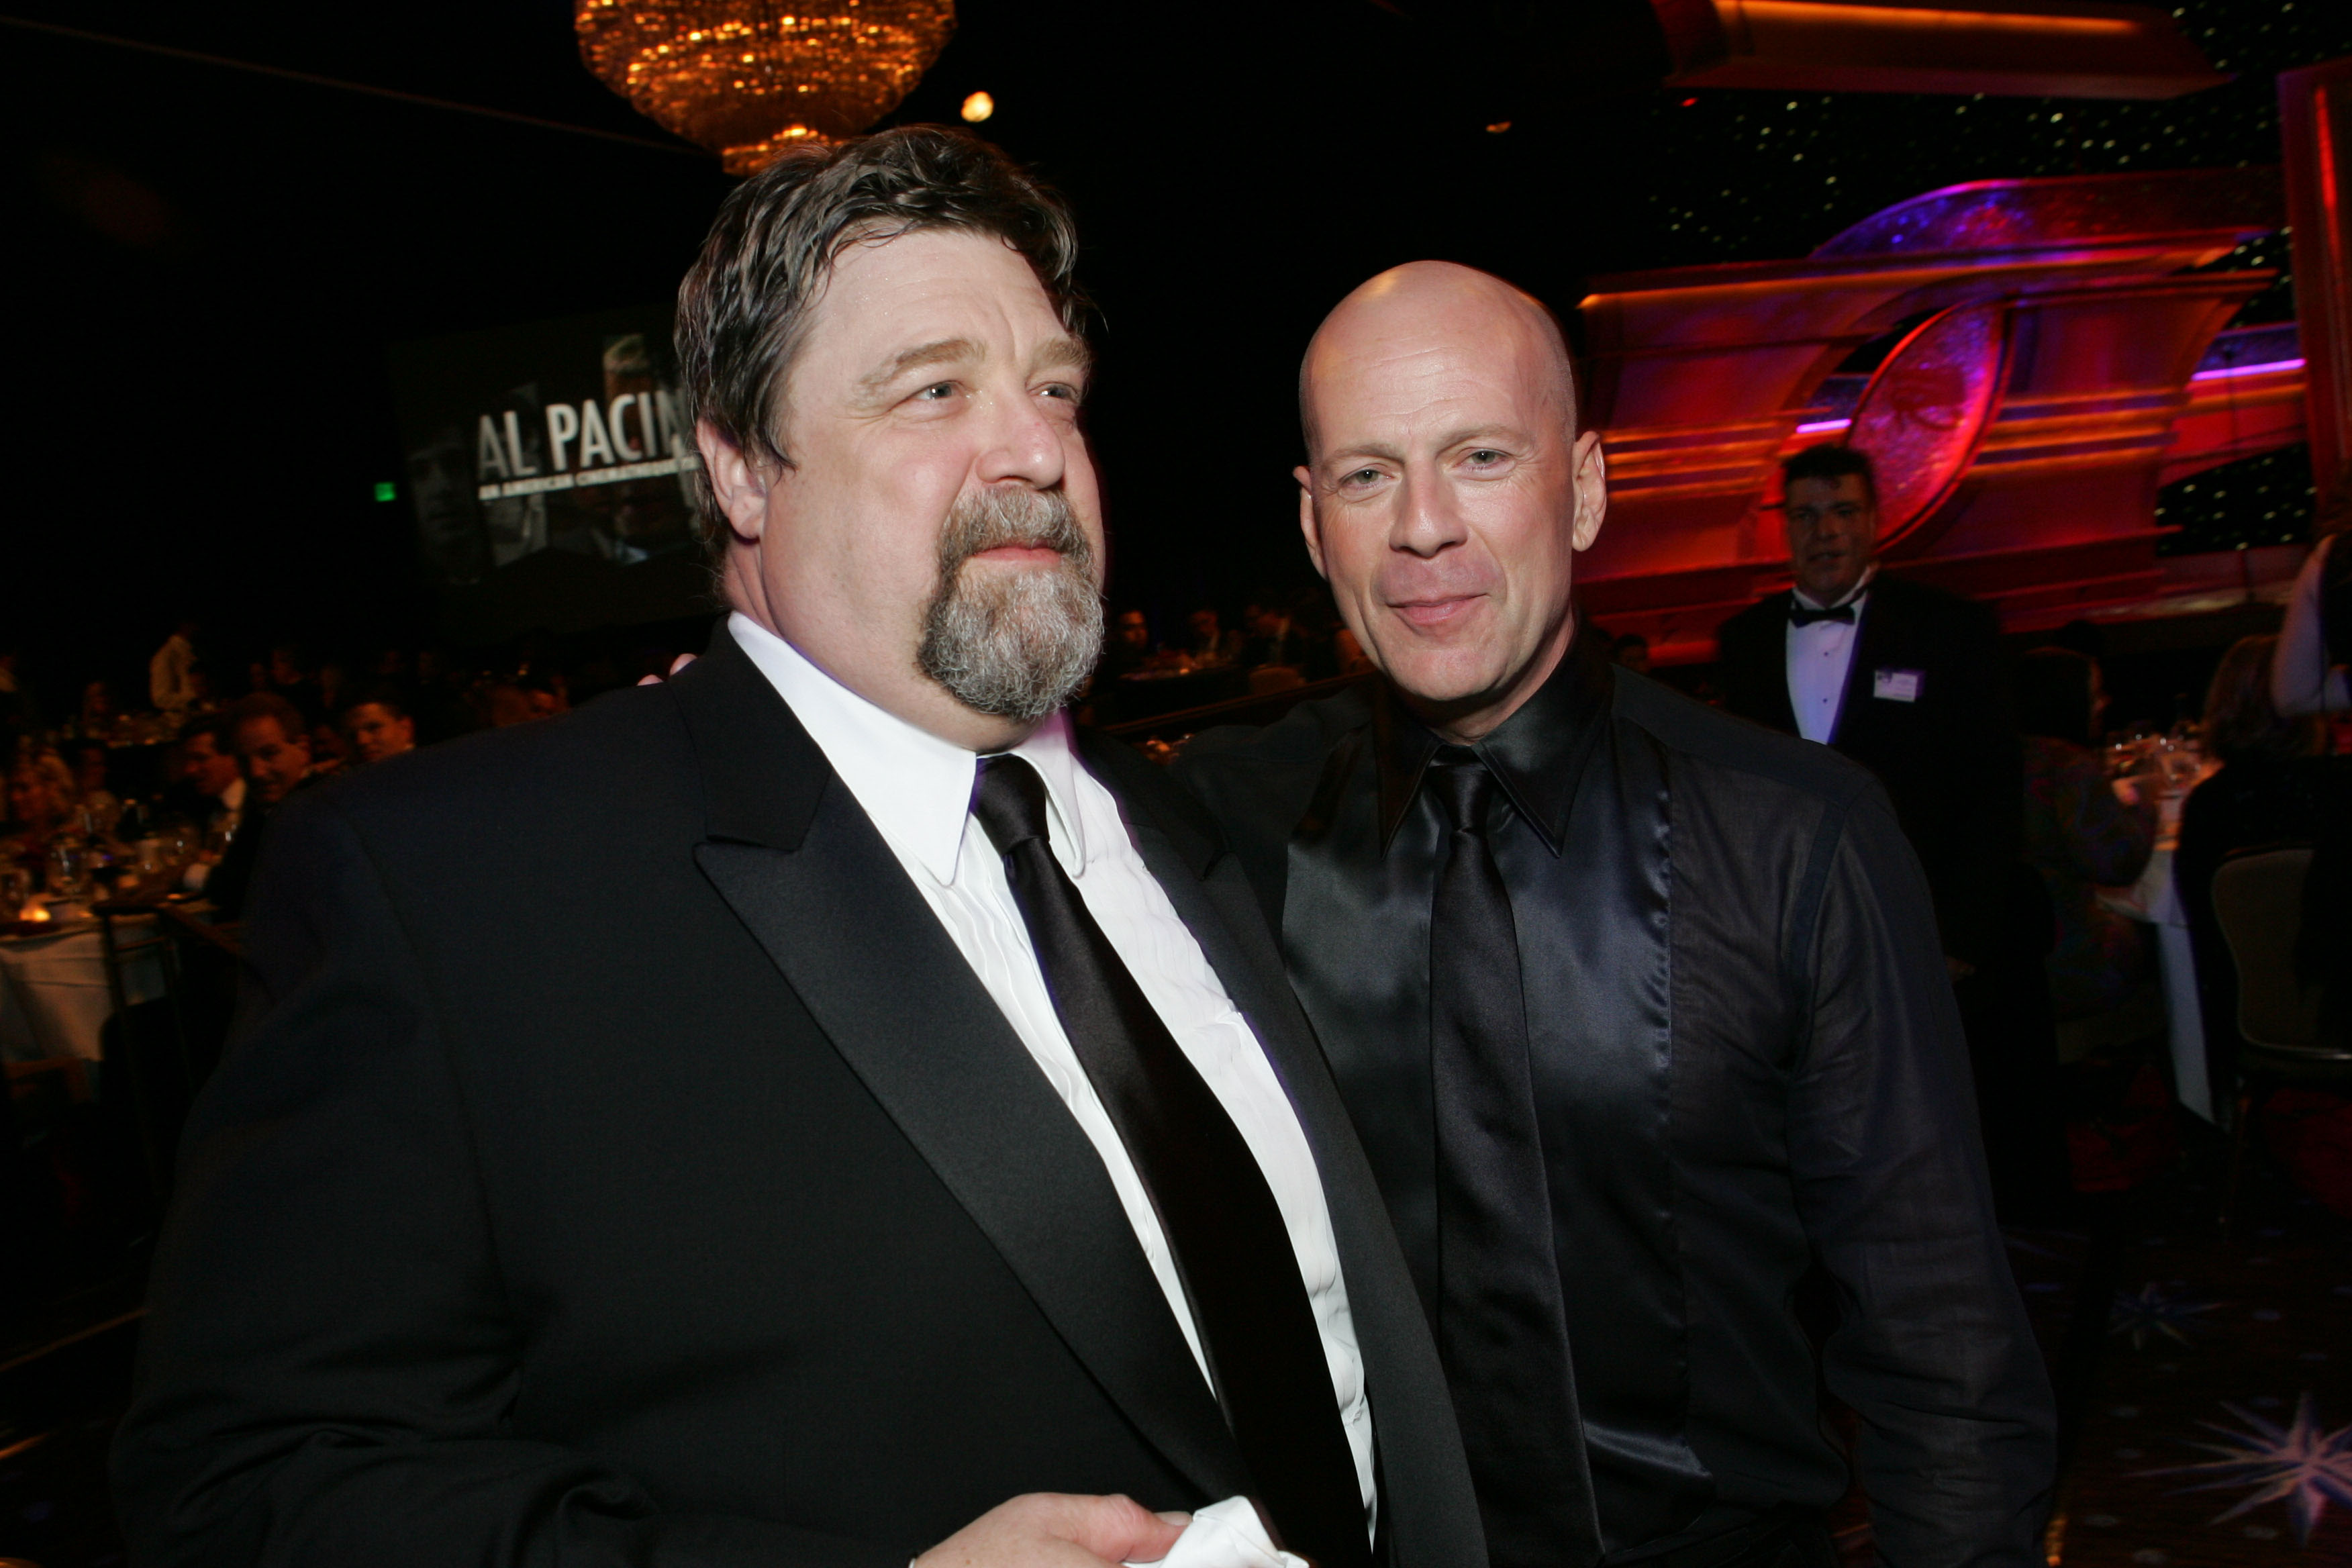 John Goodman and Bruce Willis during the 20th Annual American Cinematheque Award Honoring Al Pacino at Beverly Hilton Hotel in Beverly Hills, California, United States | Source: Getty Images